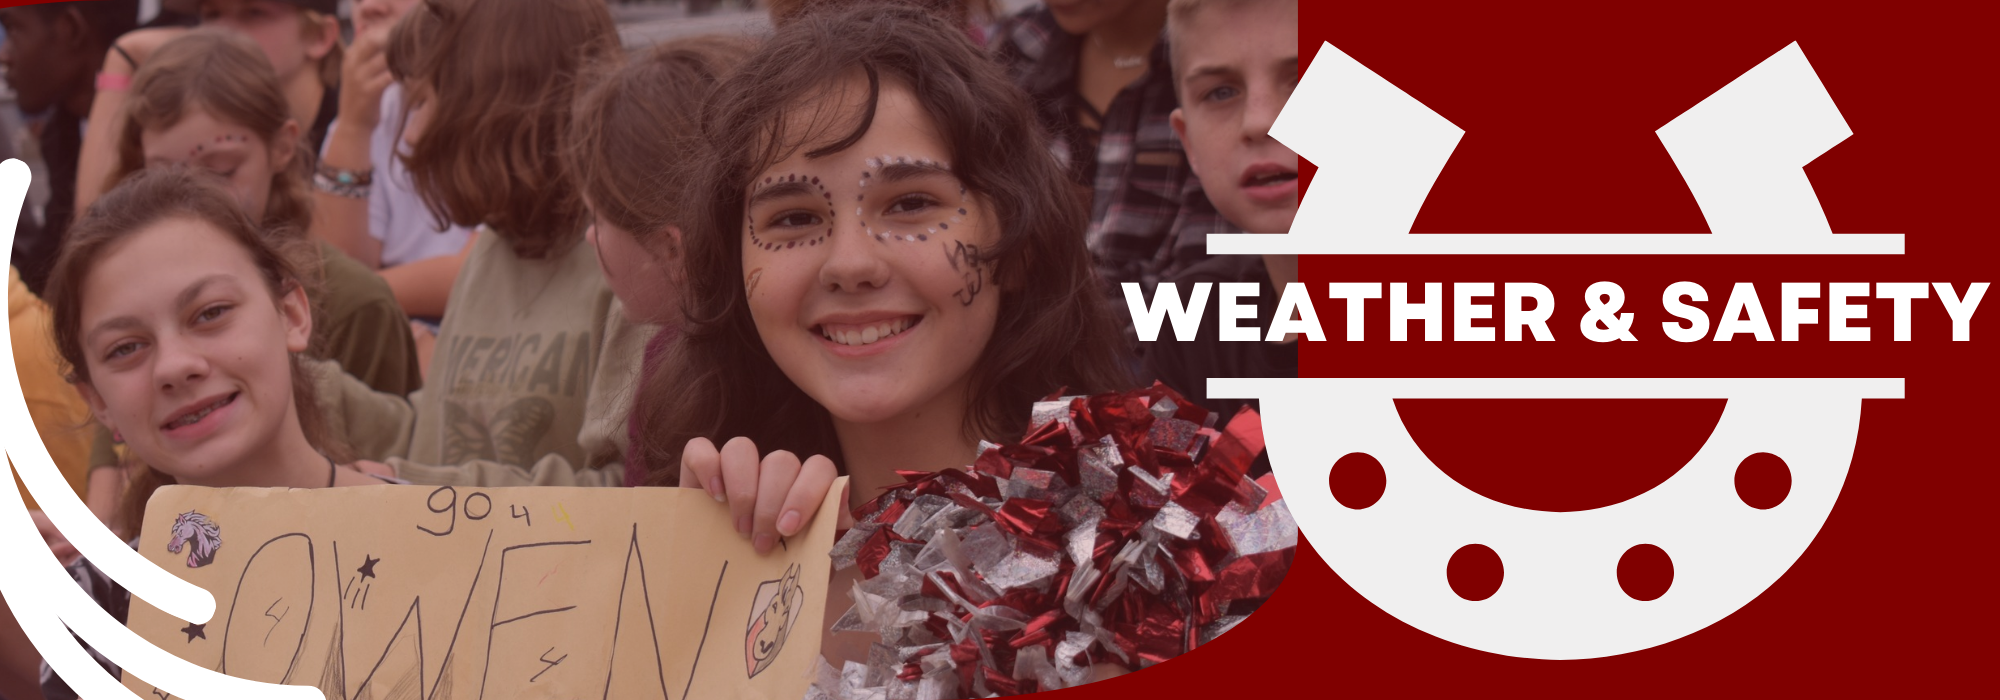 weather and safety banner with photo of students